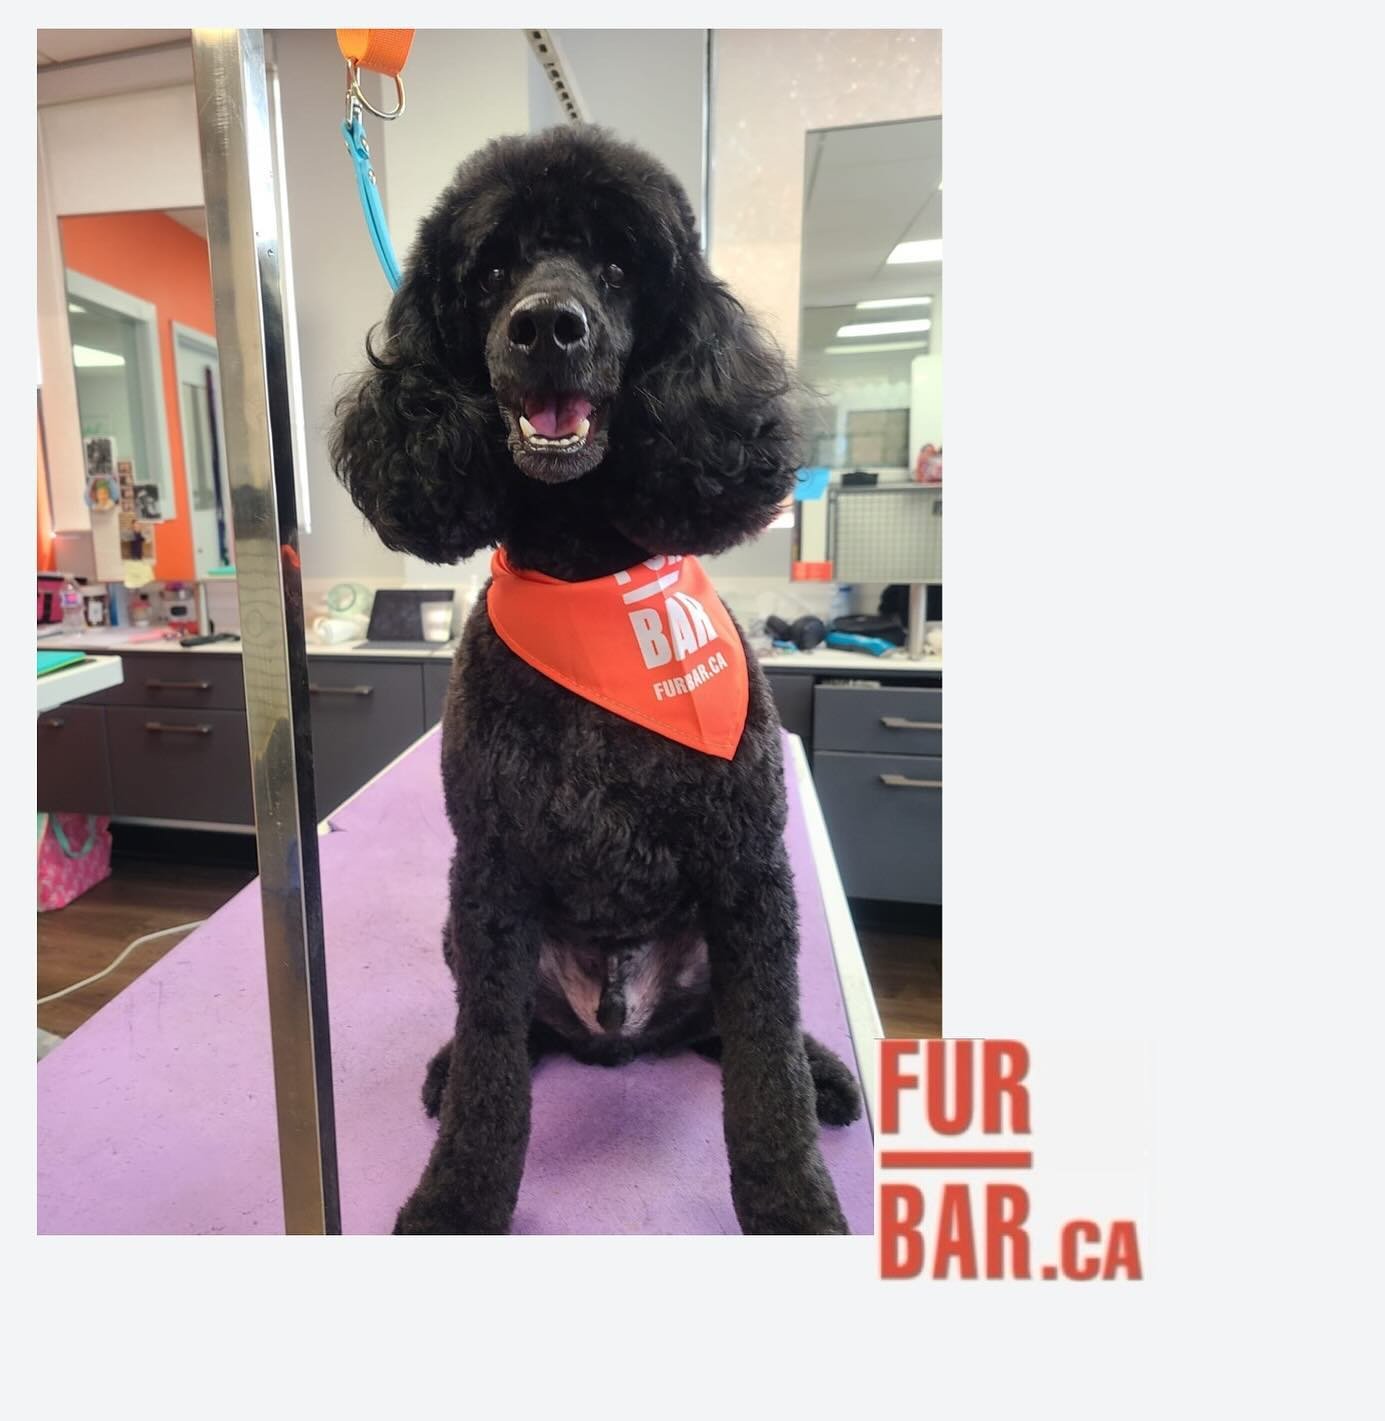 Linus may be dramatic but his looks are fire 🔥 
Groomed by 𝗞𝗮𝘁𝗲
#poodle #minipoodle #furbar #furbarpetgrooming #petgrooming #spaday #grooming #groomingday🐶✂️🛁 #northyork #toronto